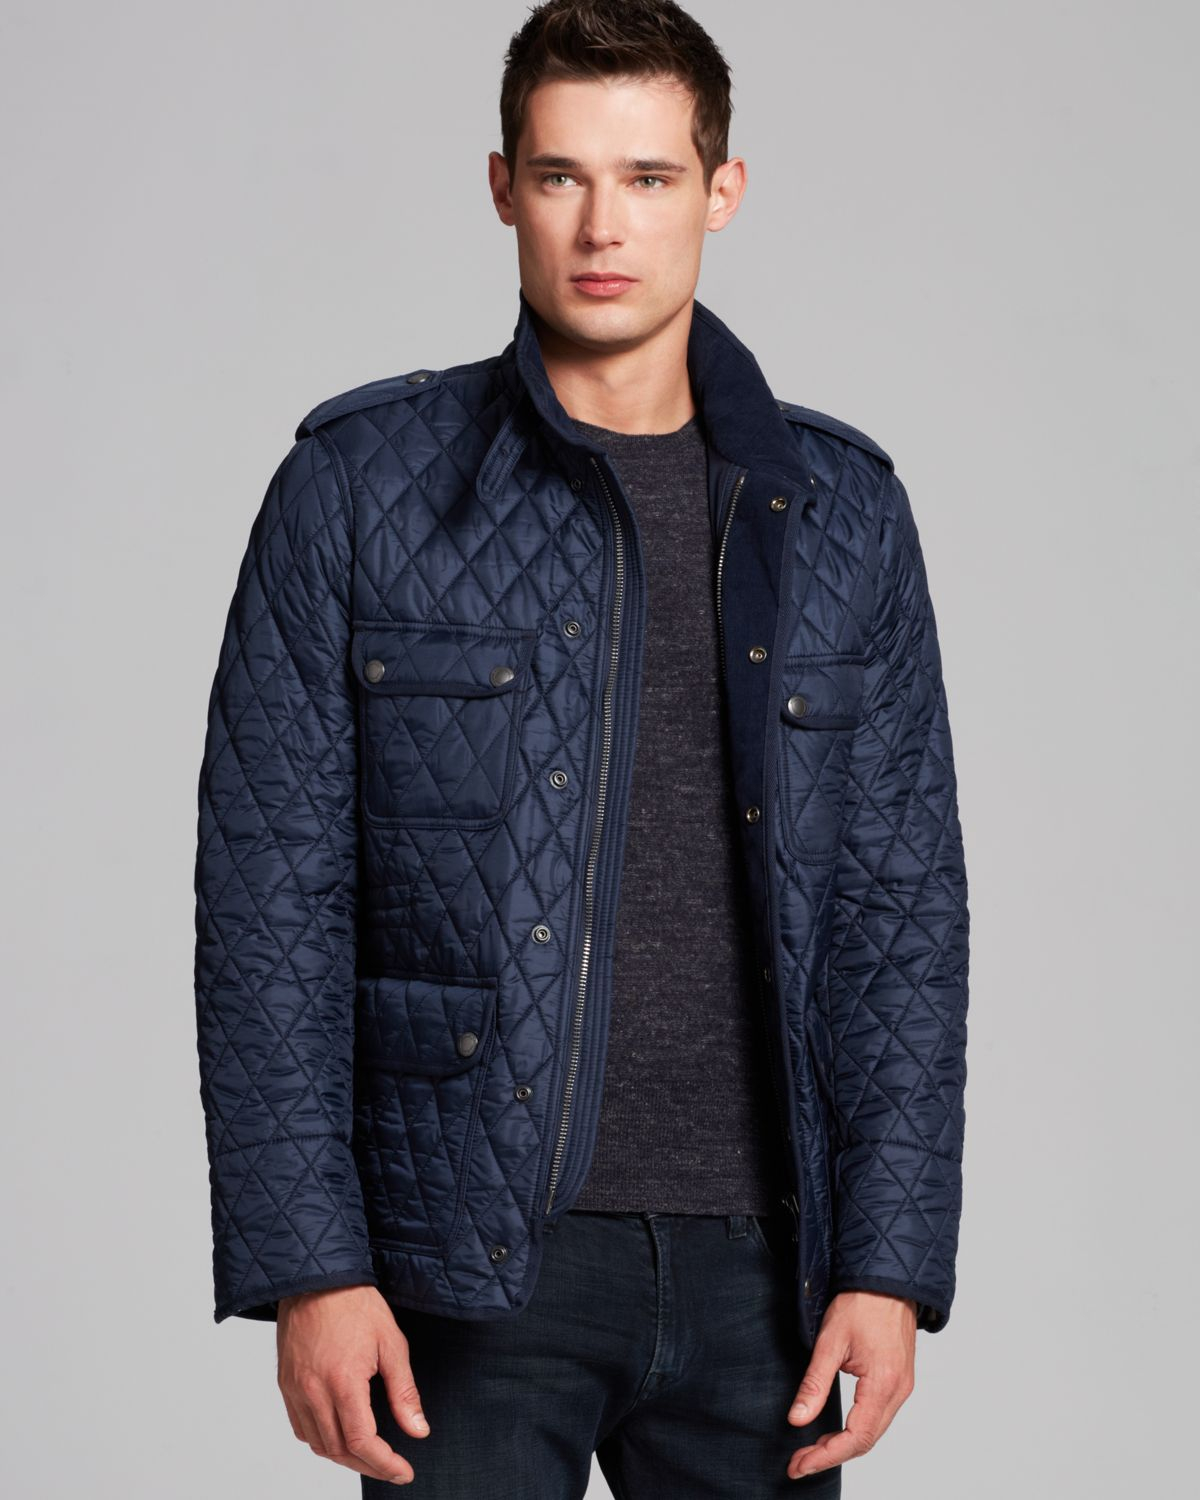 Lyst - Burberry Brit Russel Diamond Quilted Jacket in Blue for Men